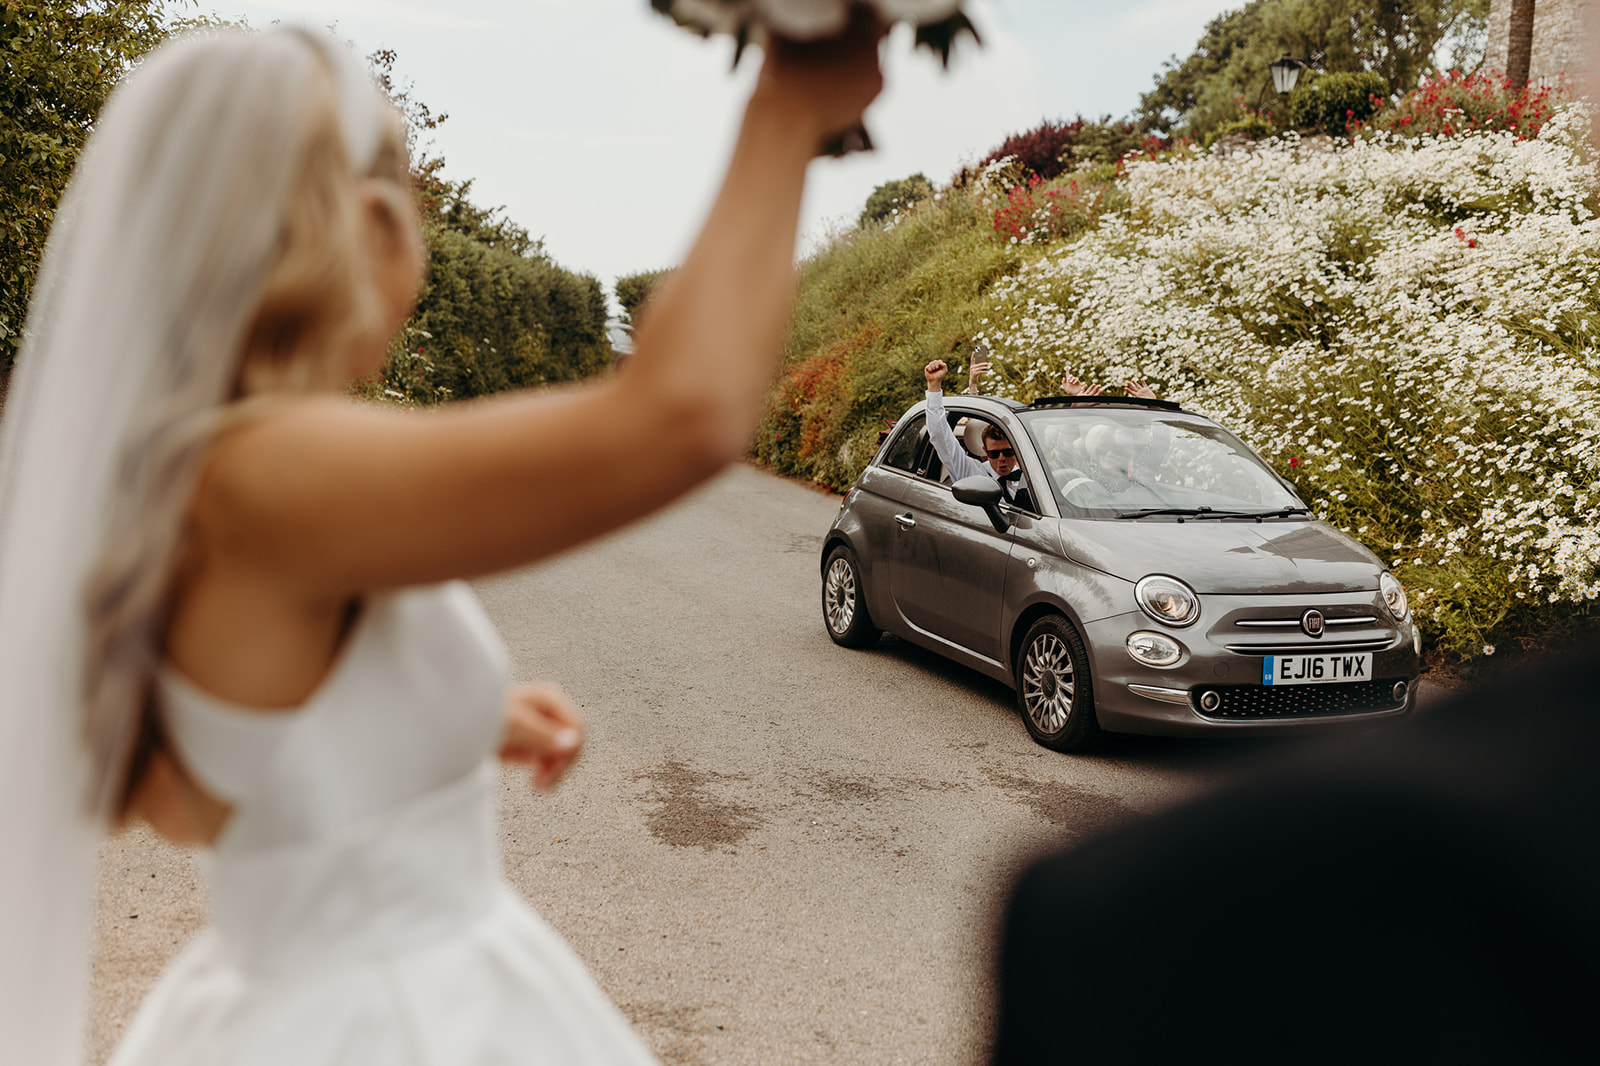 Unobtrusive shot of a bride acknowledging friends in a passing vehicle after her church wedding